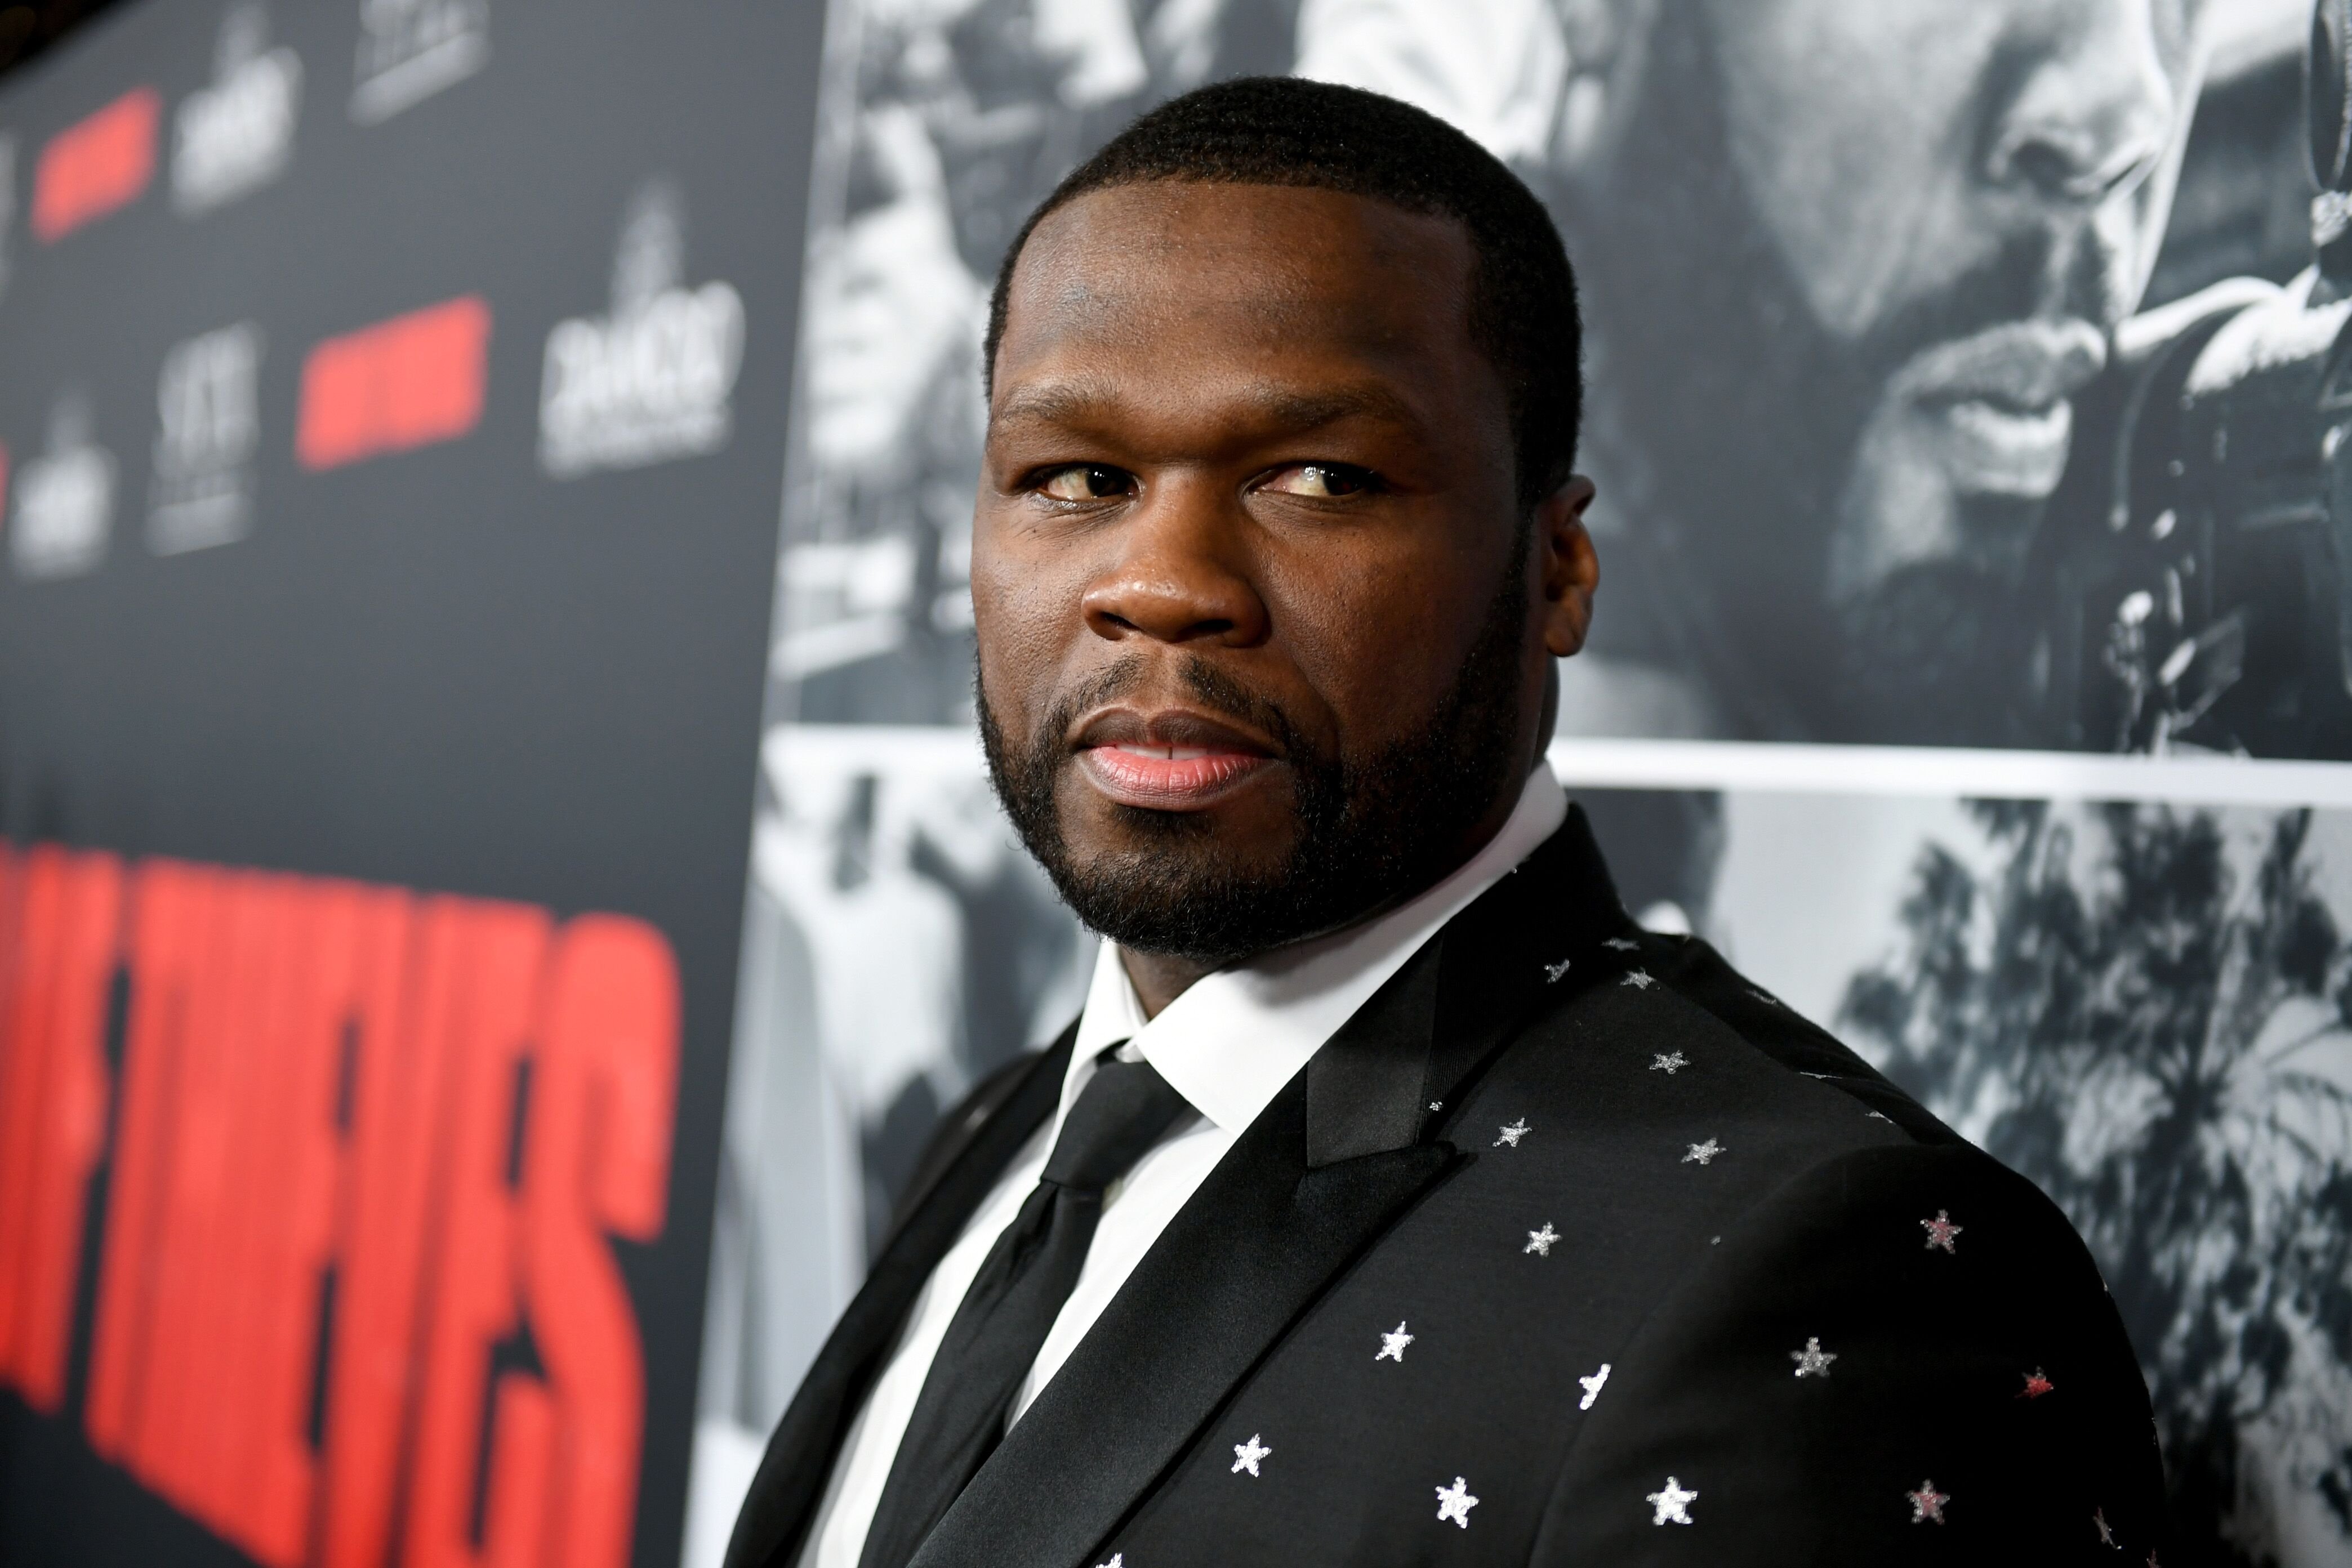 Curtis ‘50 Cent’ Jackson at "Power Starz" premiere in Los Angeles/ Source: Getty Images